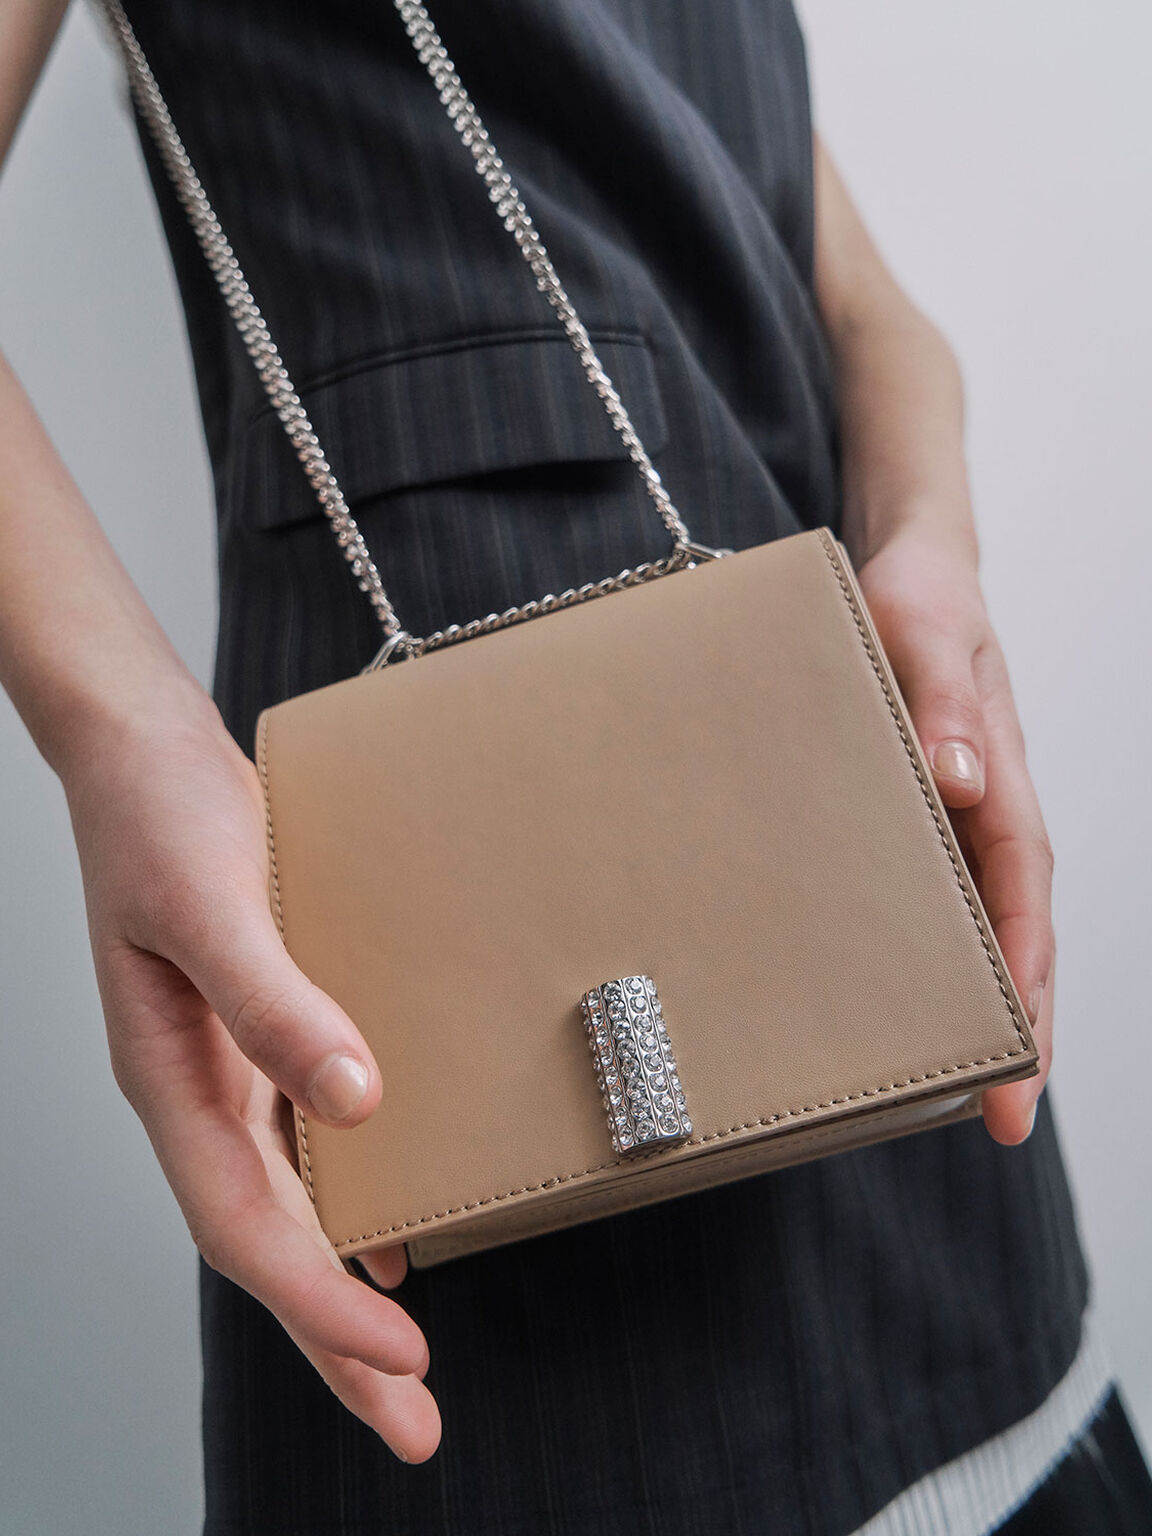 Leather Chain Strap Boxy Bag, Nude, hi-res